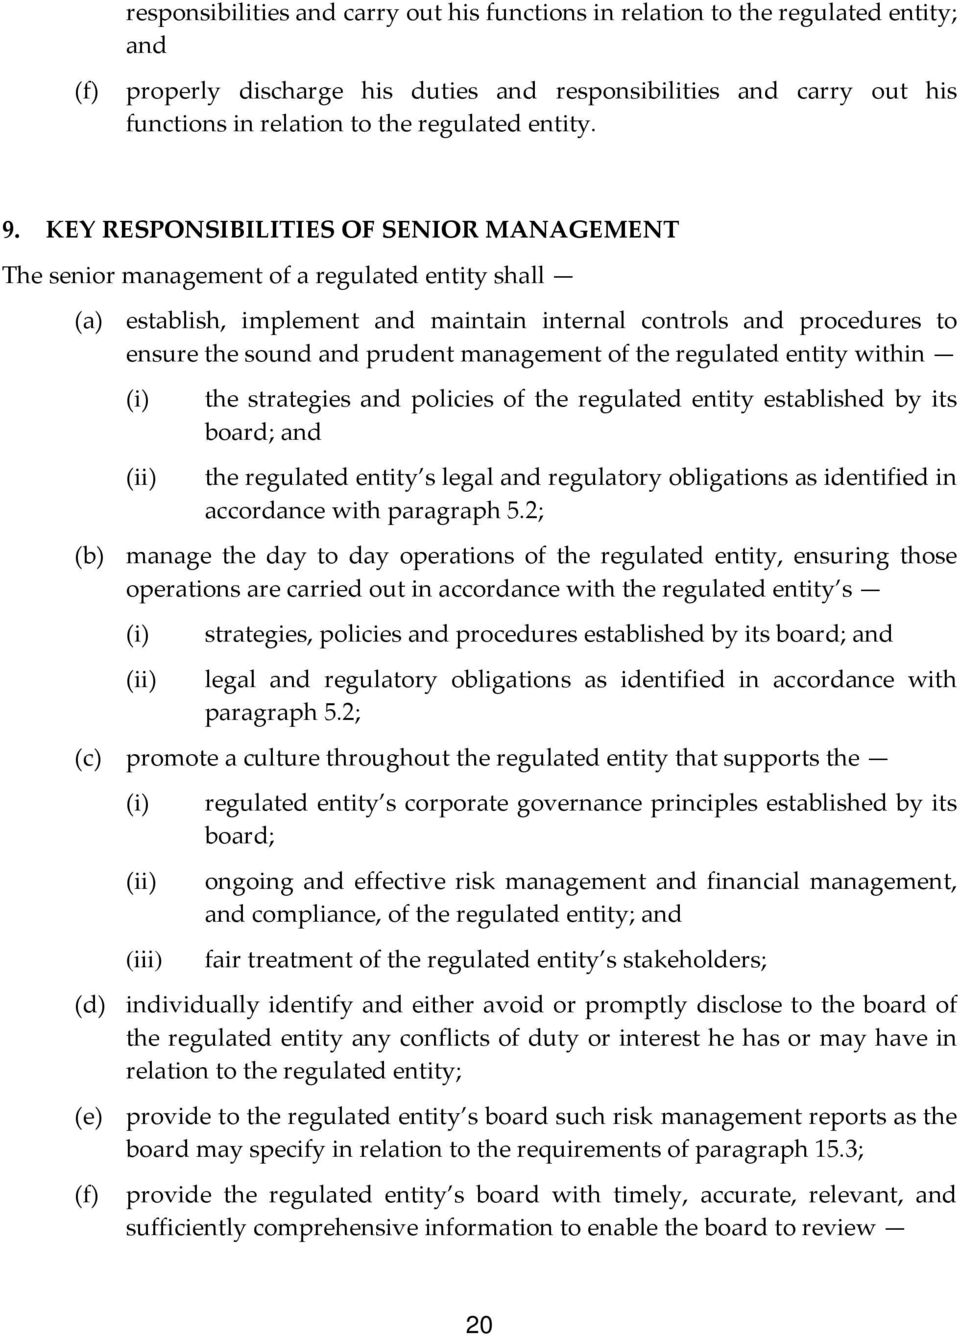 KEY RESPONSIBILITIES OF SENIOR MANAGEMENT The senior management of a regulated entity shall (a) establish, implement and maintain internal controls and procedures to ensure the sound and prudent